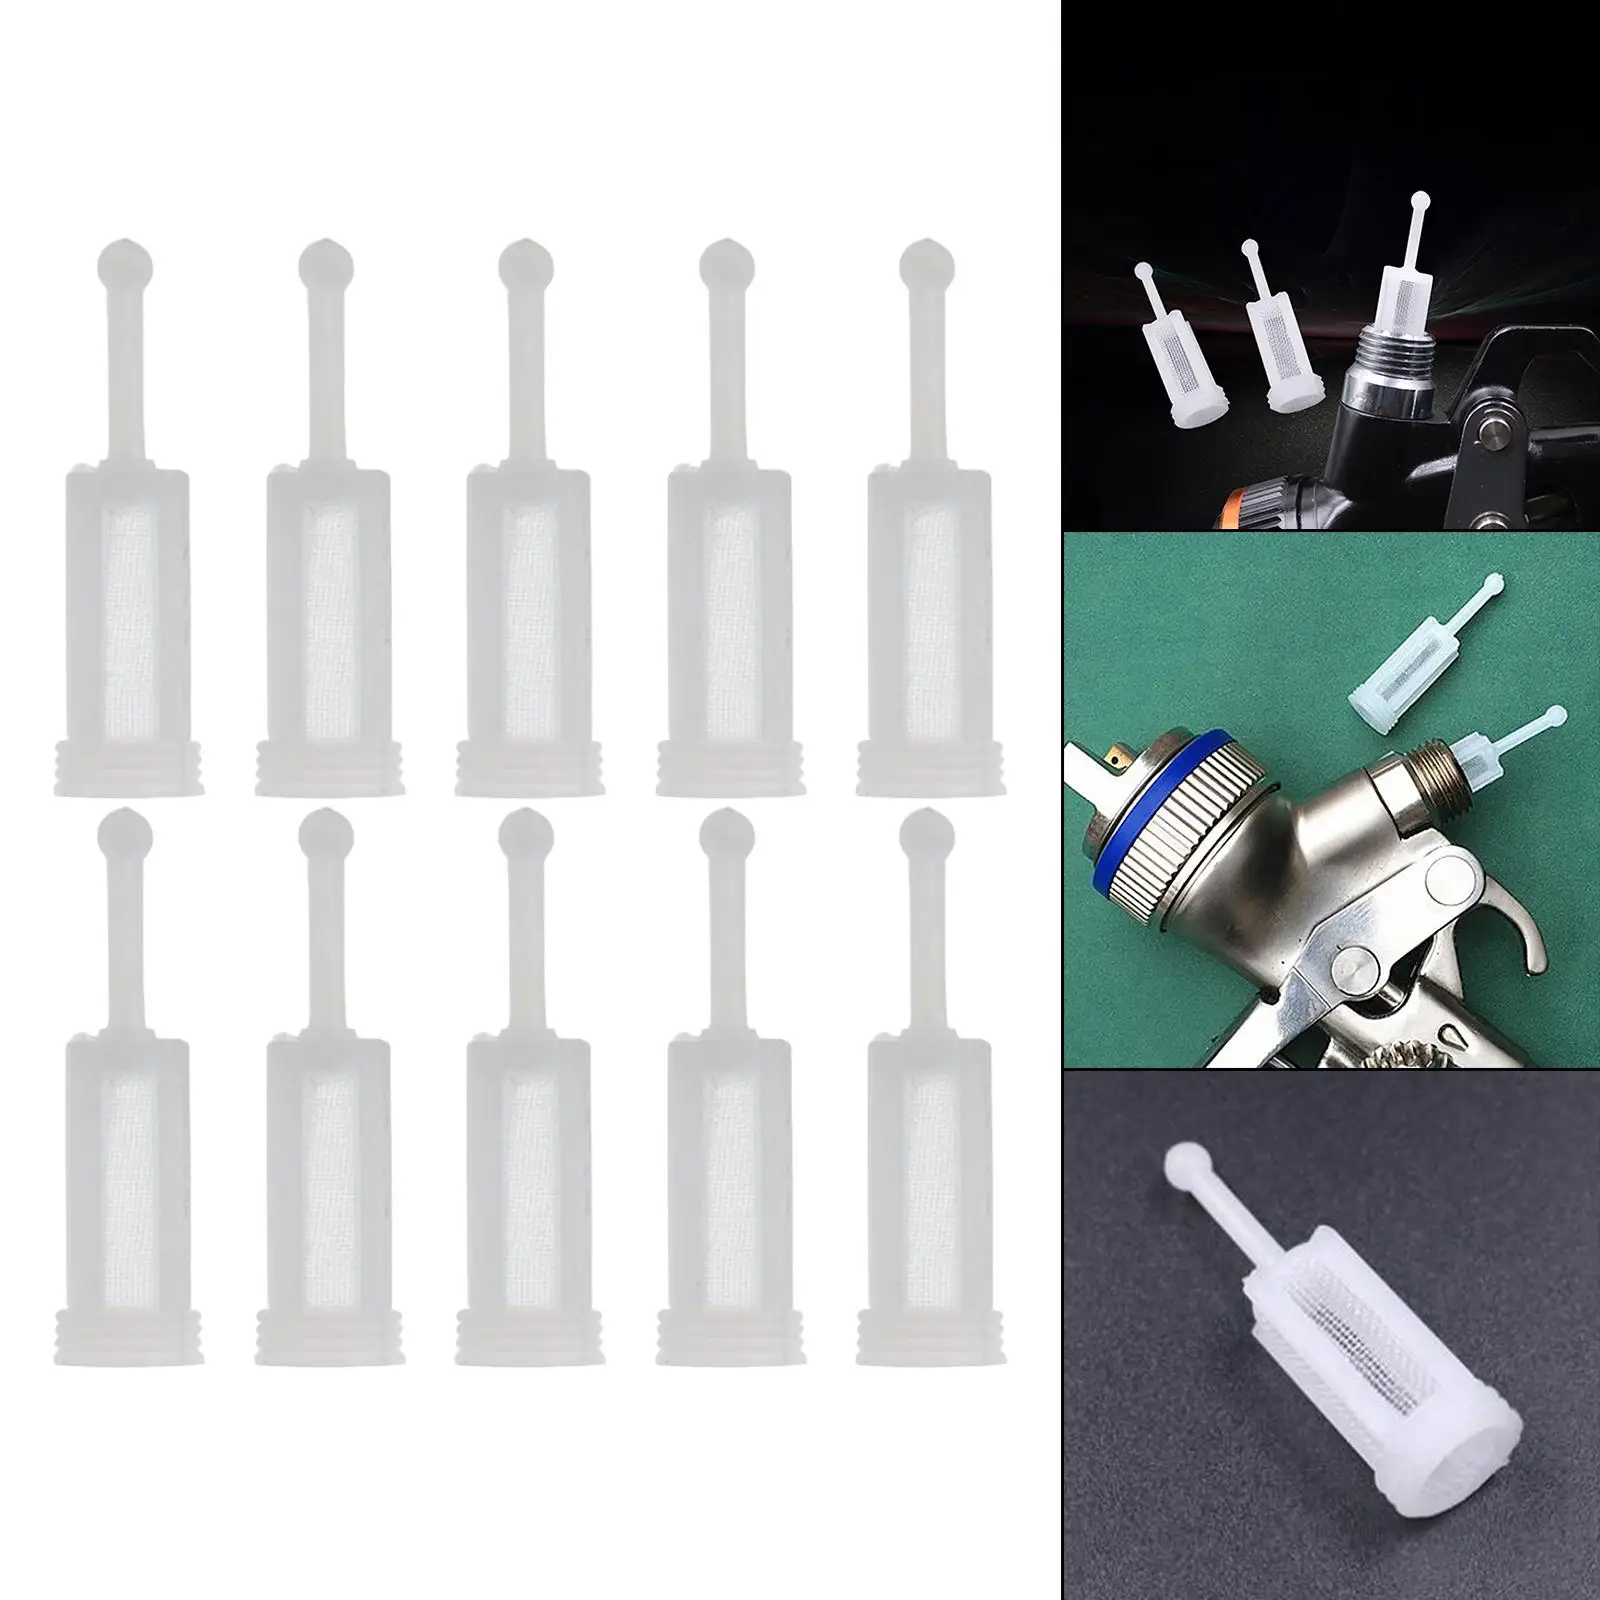 

10x Gravity Type feed Spray Gun Filters Fine Mesh Universal Disposable HVLP Gravity feed Paint Strainers for Automotive Paint